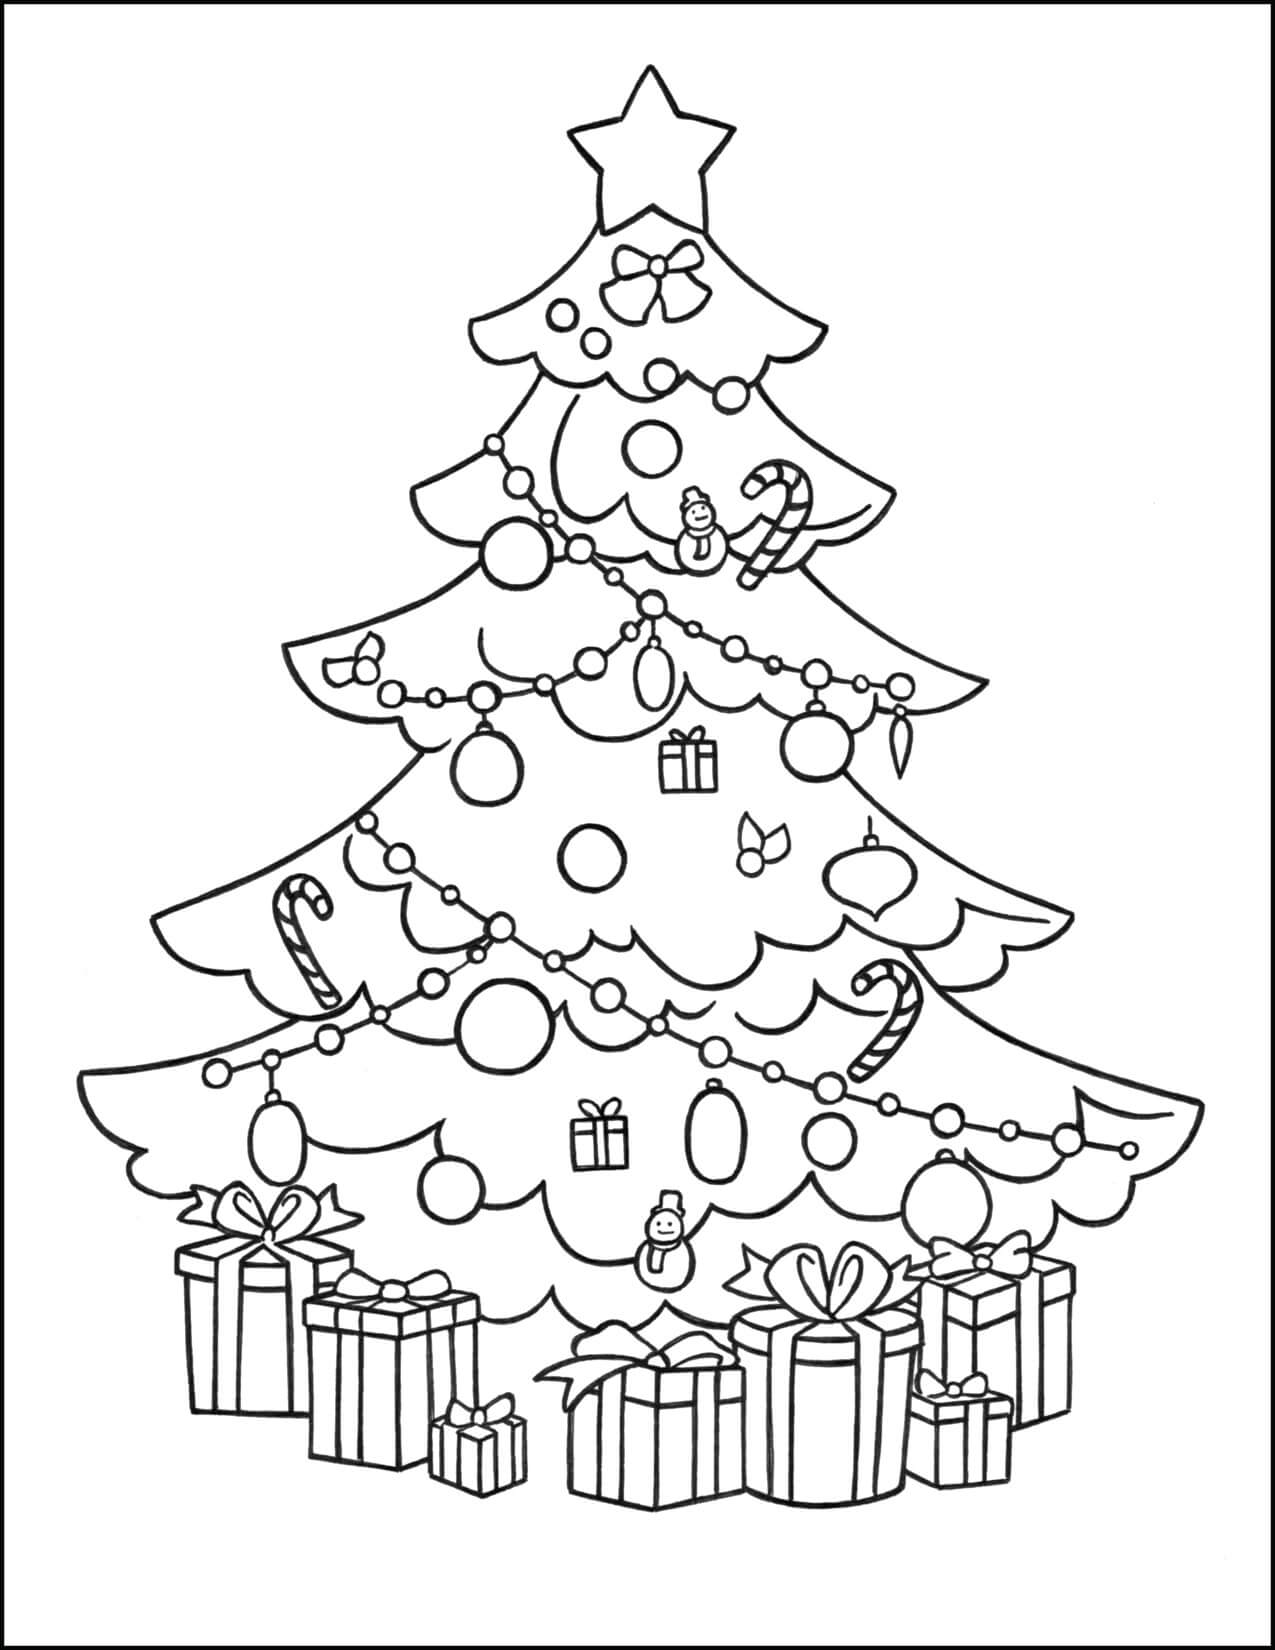 Free Printable Christmas Tree Colouring Pages Christmas Tree Coloring 